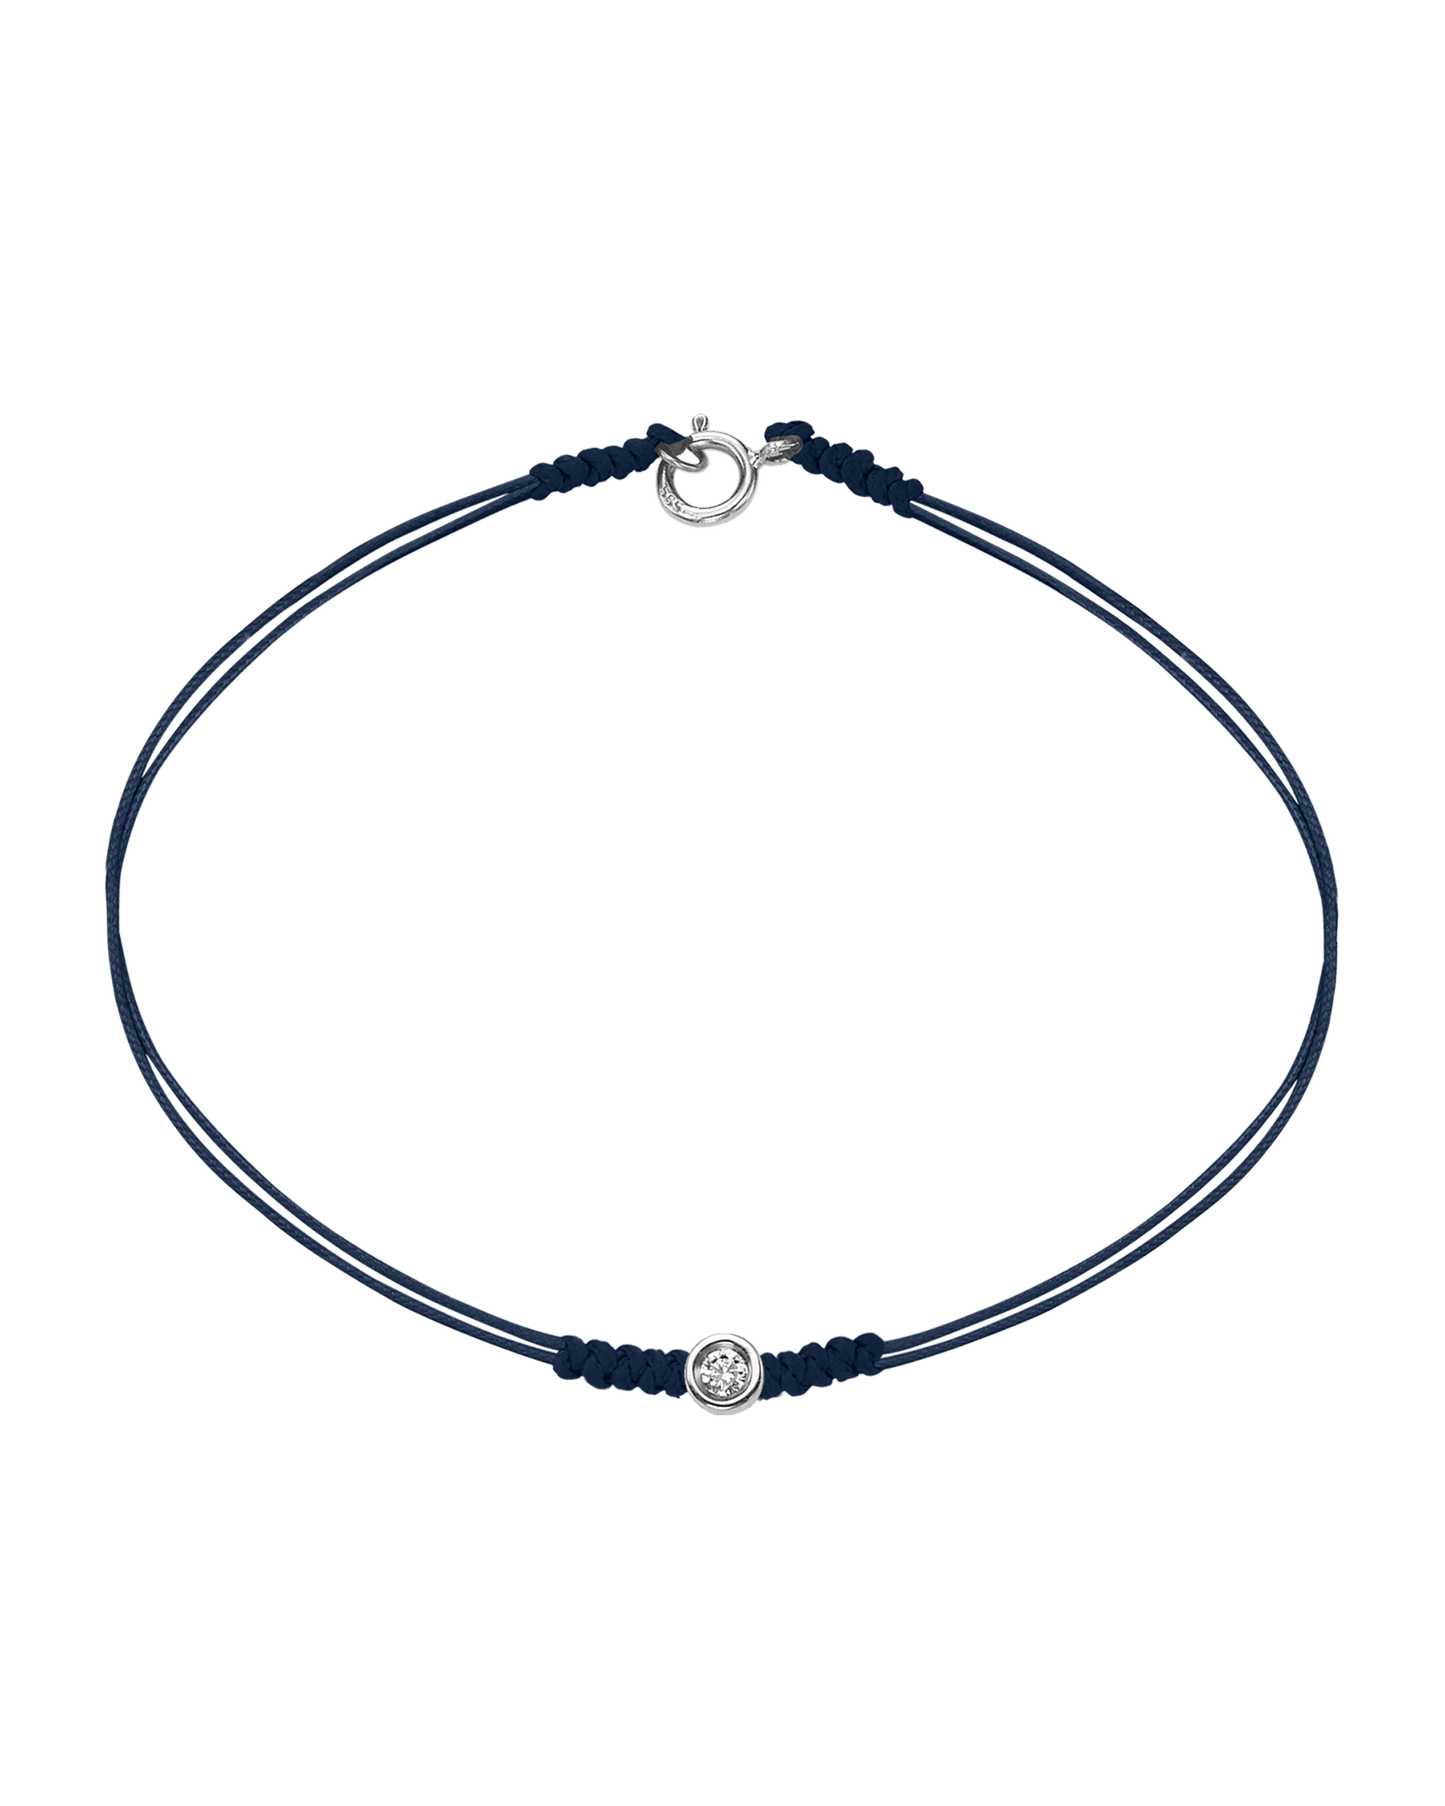 The Classic String of Love with clasp - 14K White Gold Bracelets 14K Solid Gold Navy Blue Small: 0.03ct Small - 6 Inches (15.5cm)